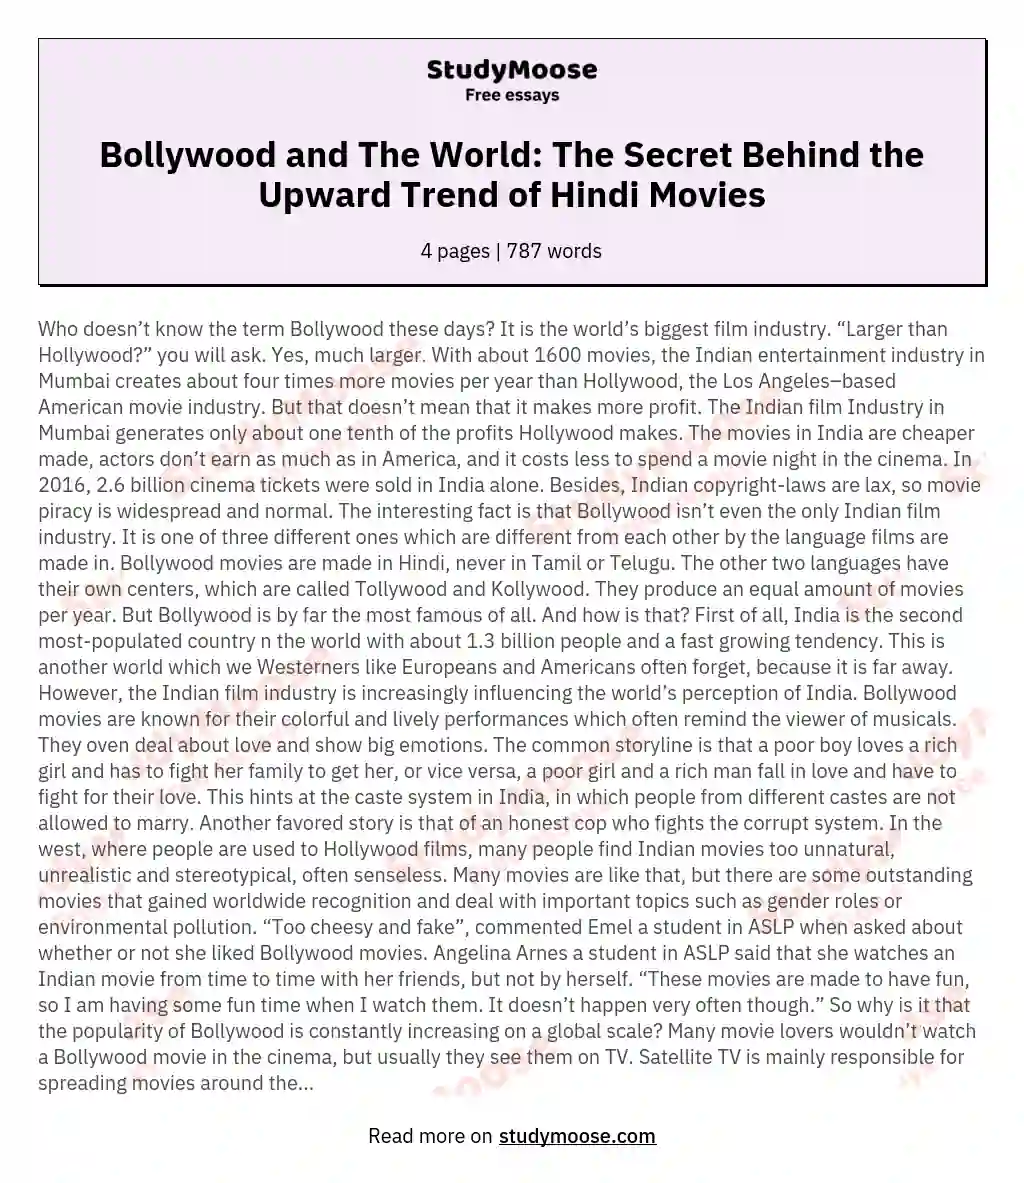 Bollywood and The World: The Secret Behind the Upward Trend of Hindi Movies